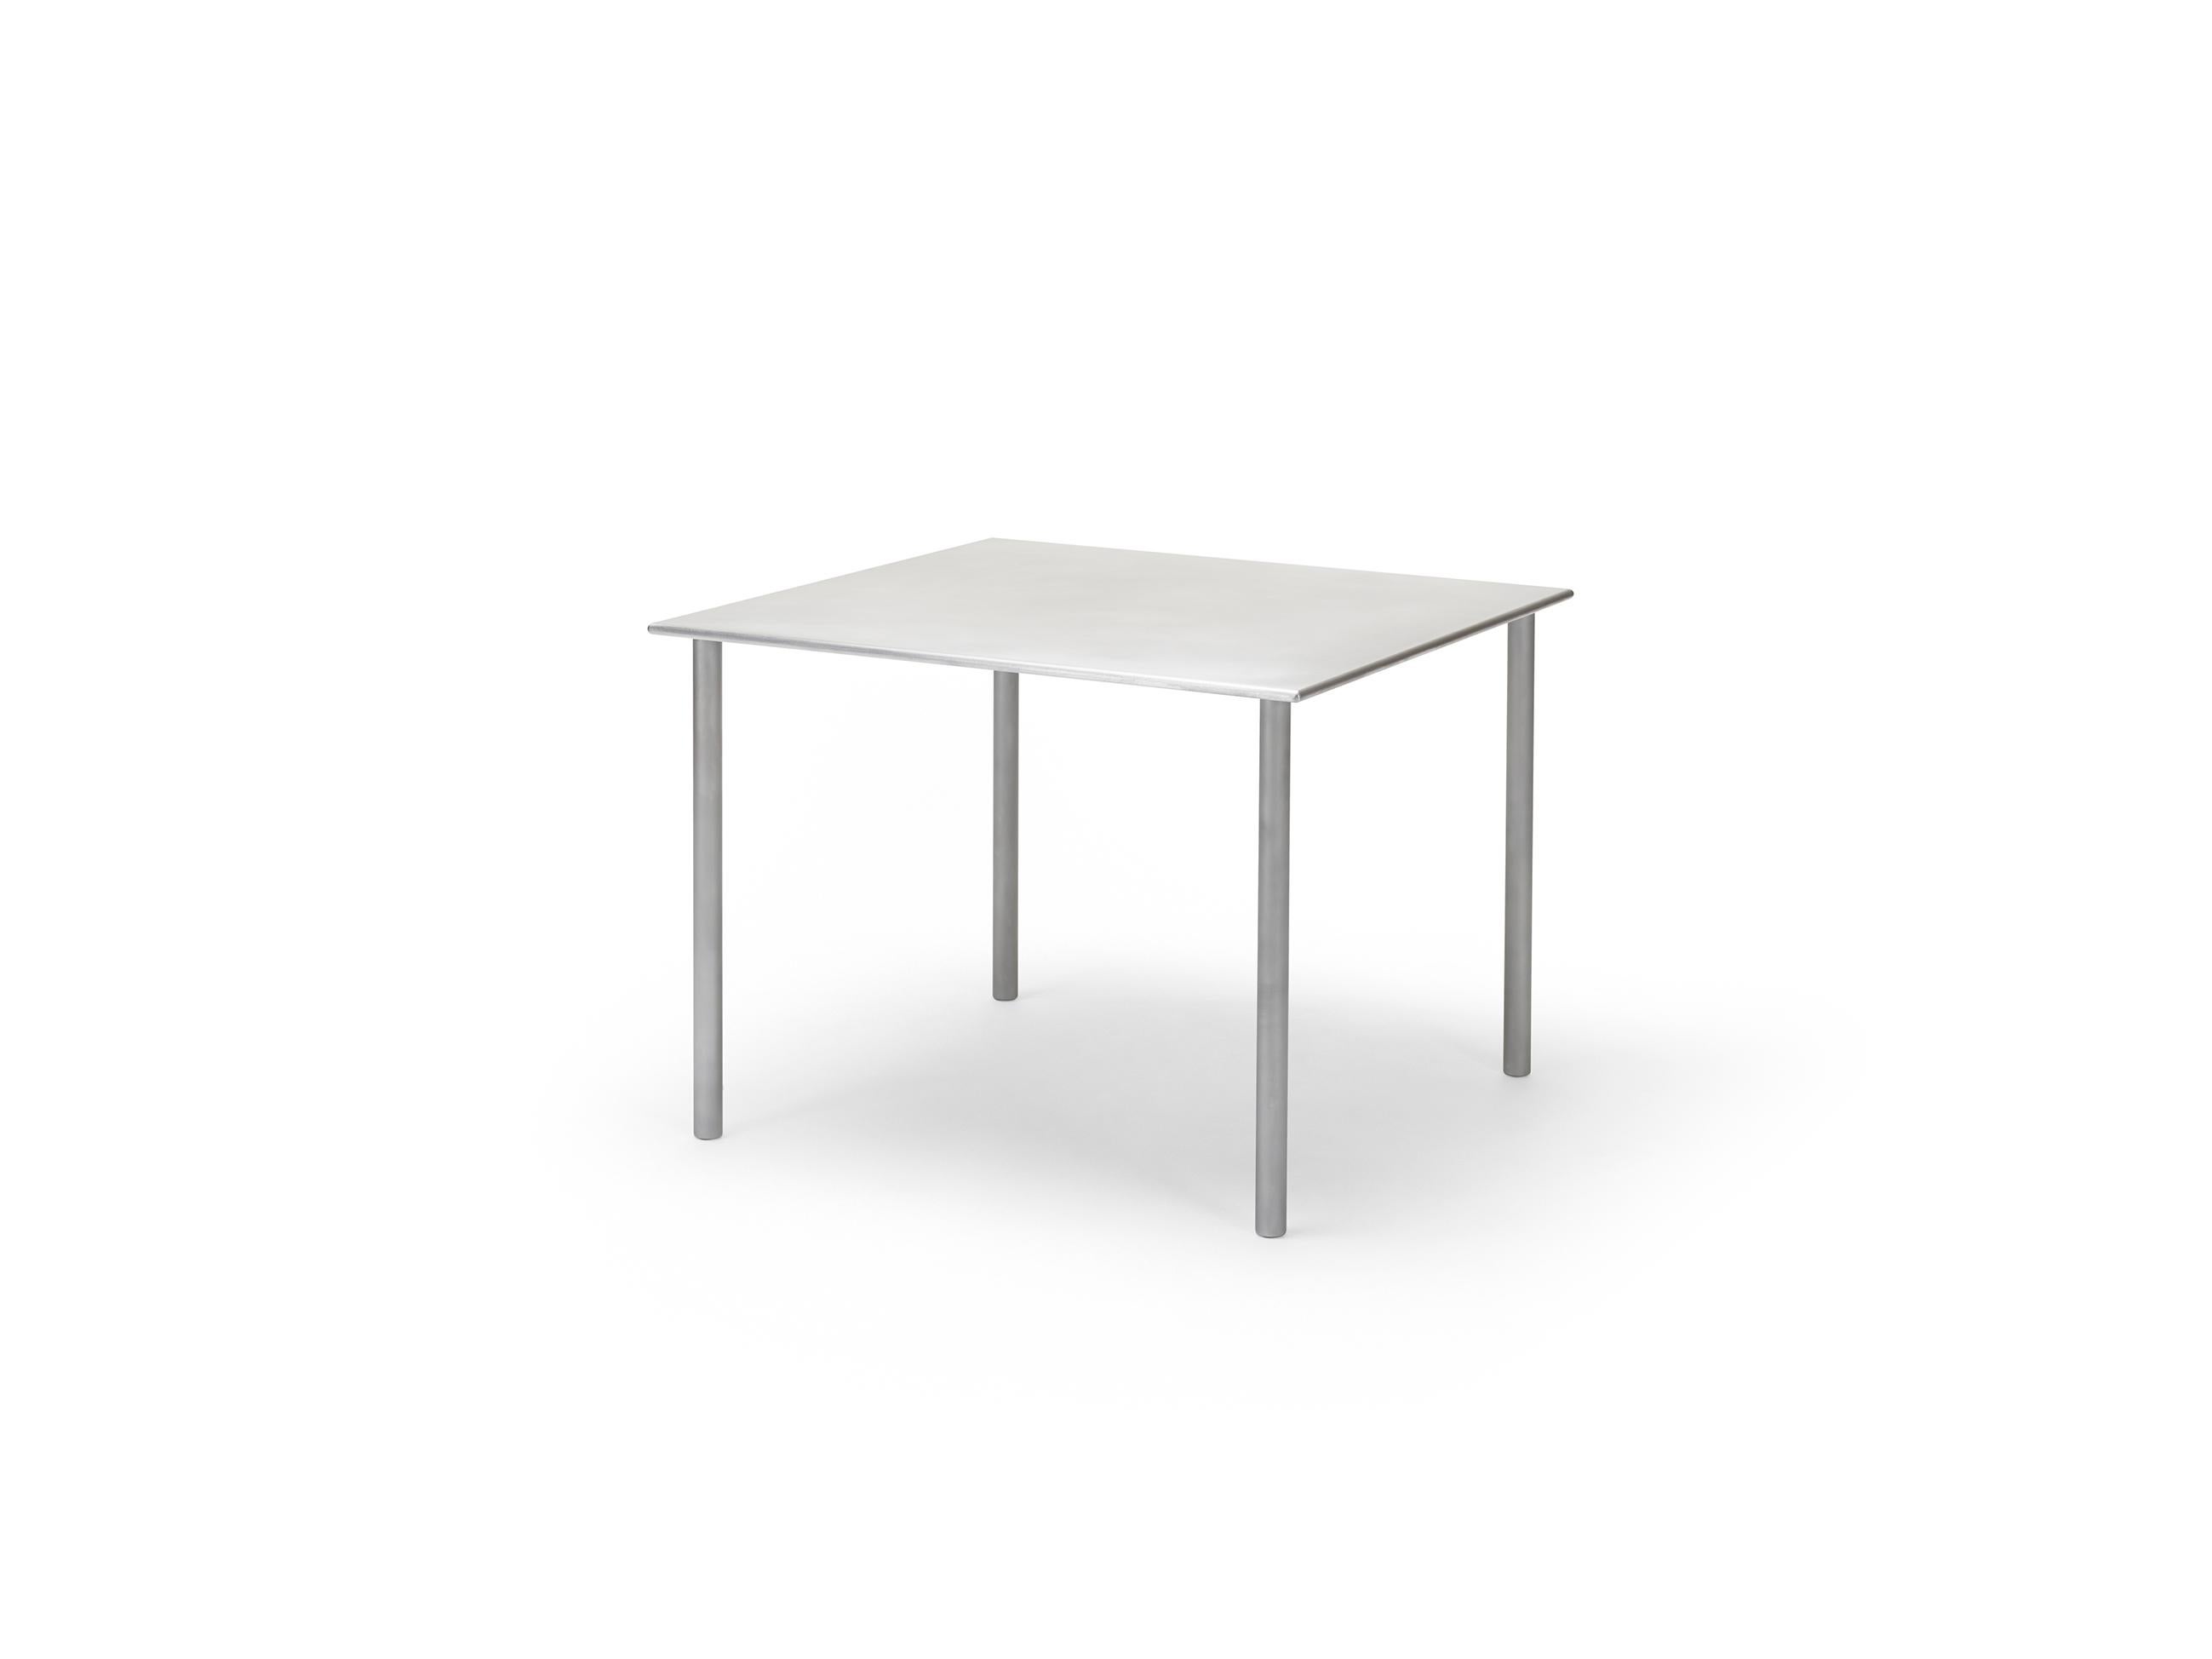 S.C.T. table in solid 1/2